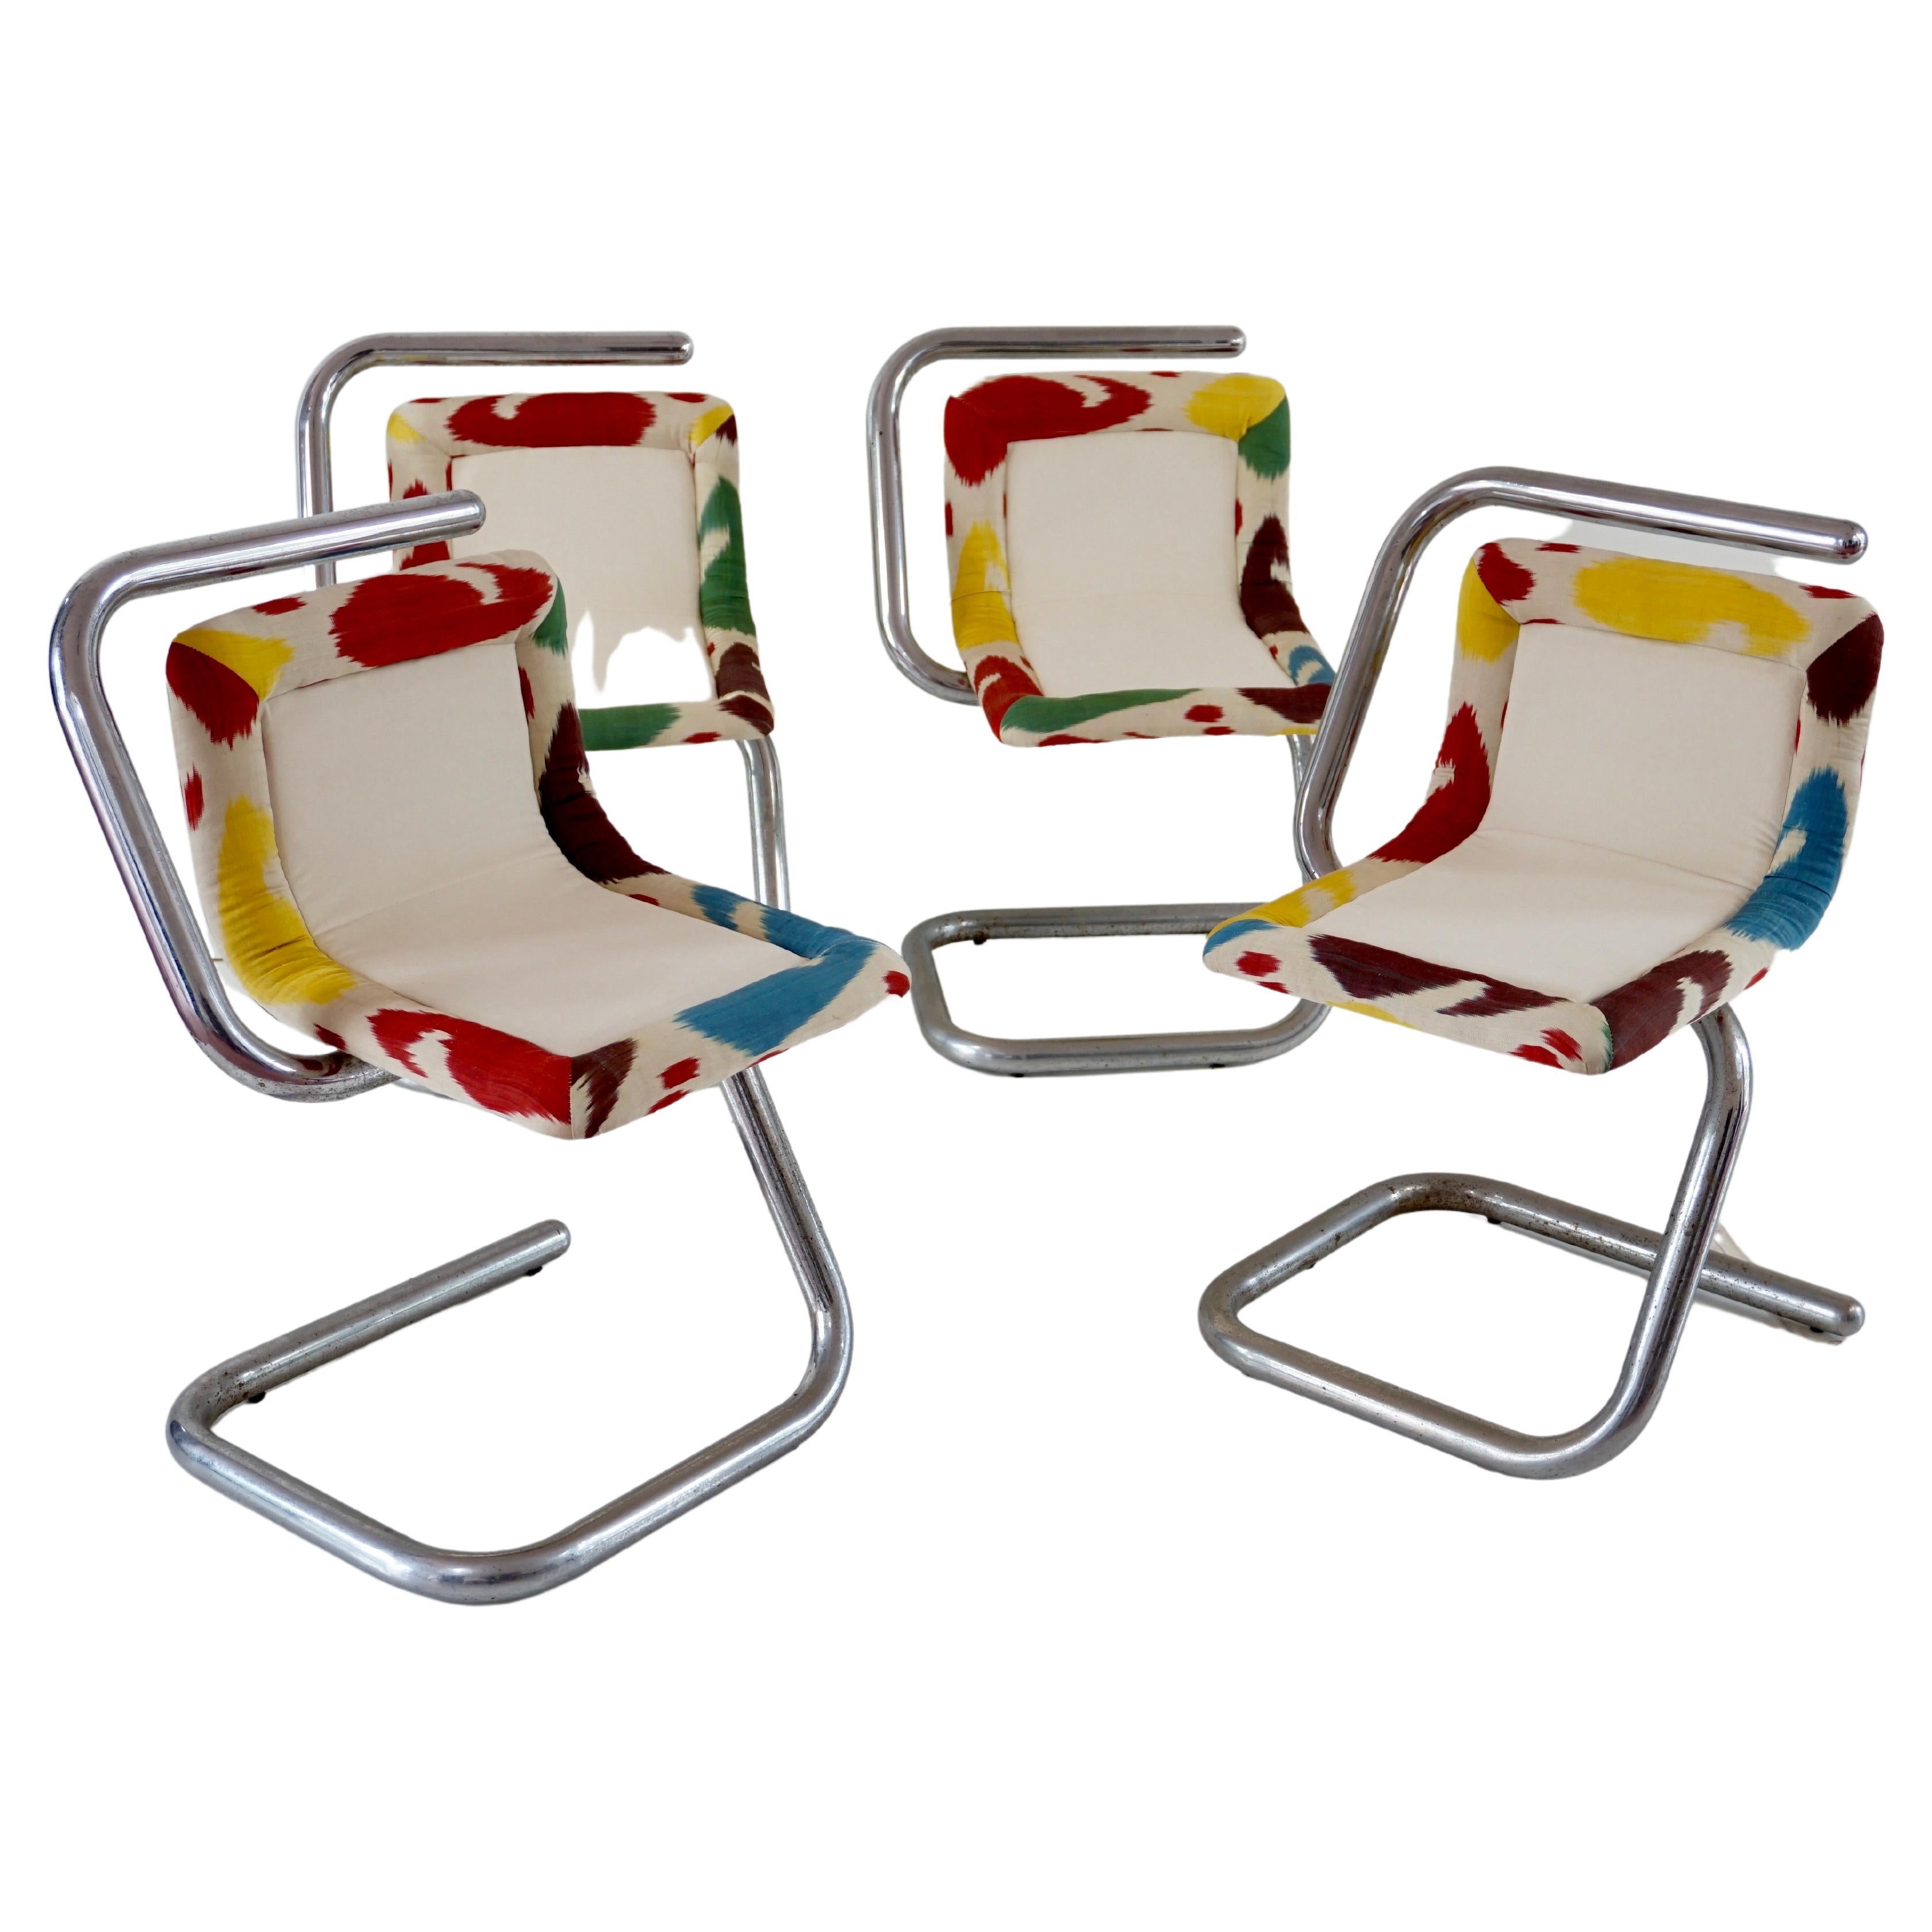 Set of Four Tubular Chrome Chairs, Velvet and Ikat, 1970 by Giotto Stoppino